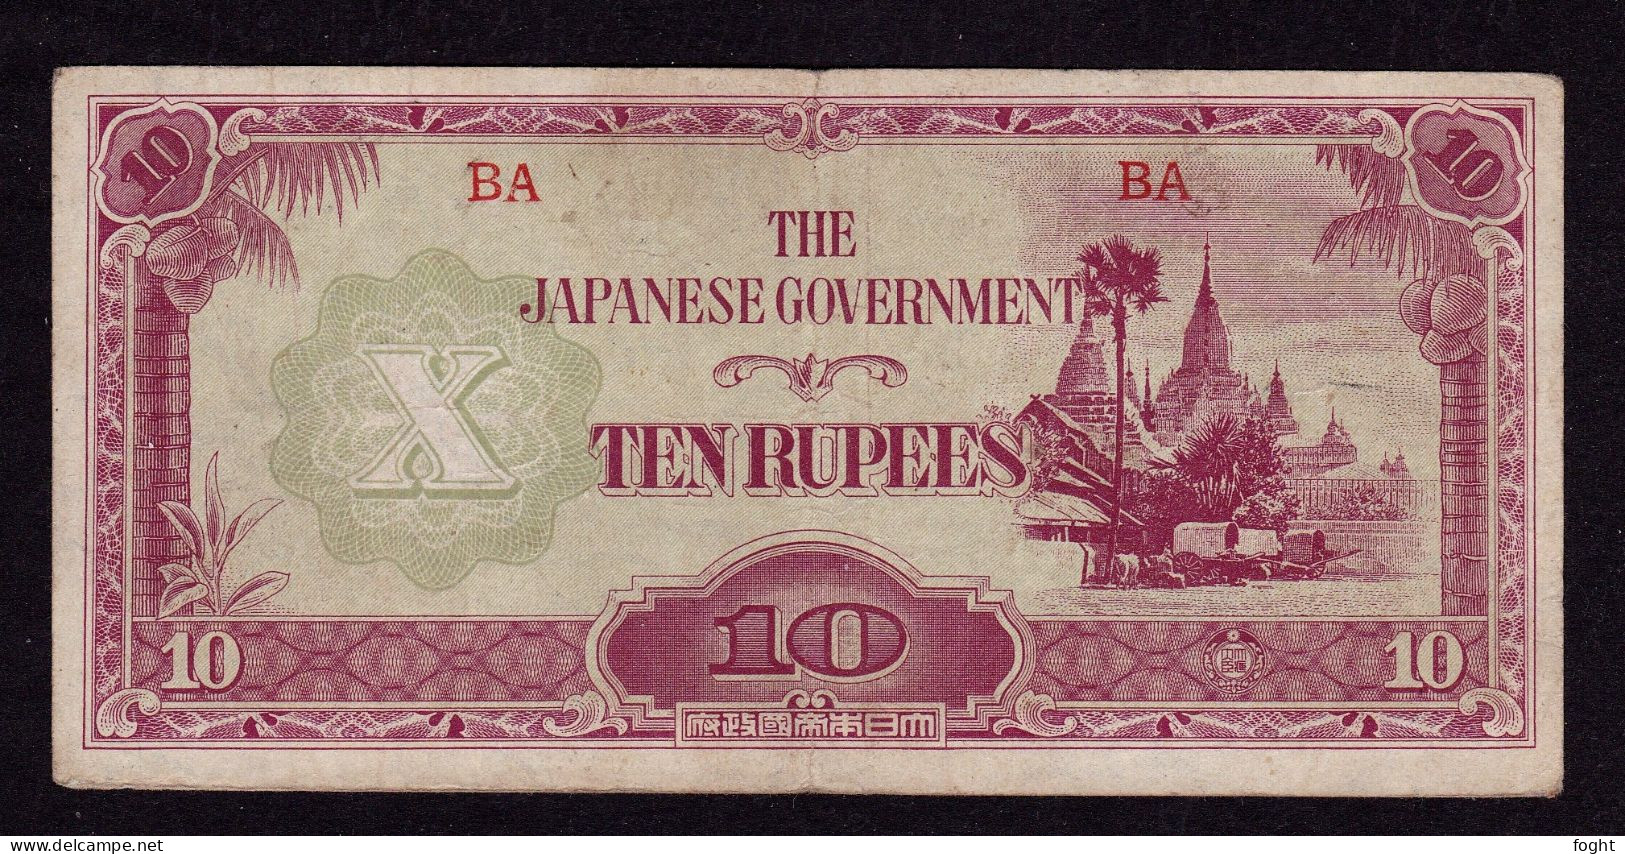 Japanese Government (Burma) Ten (10) Rupees Note - From 1942-45 (WWII) - Giappone